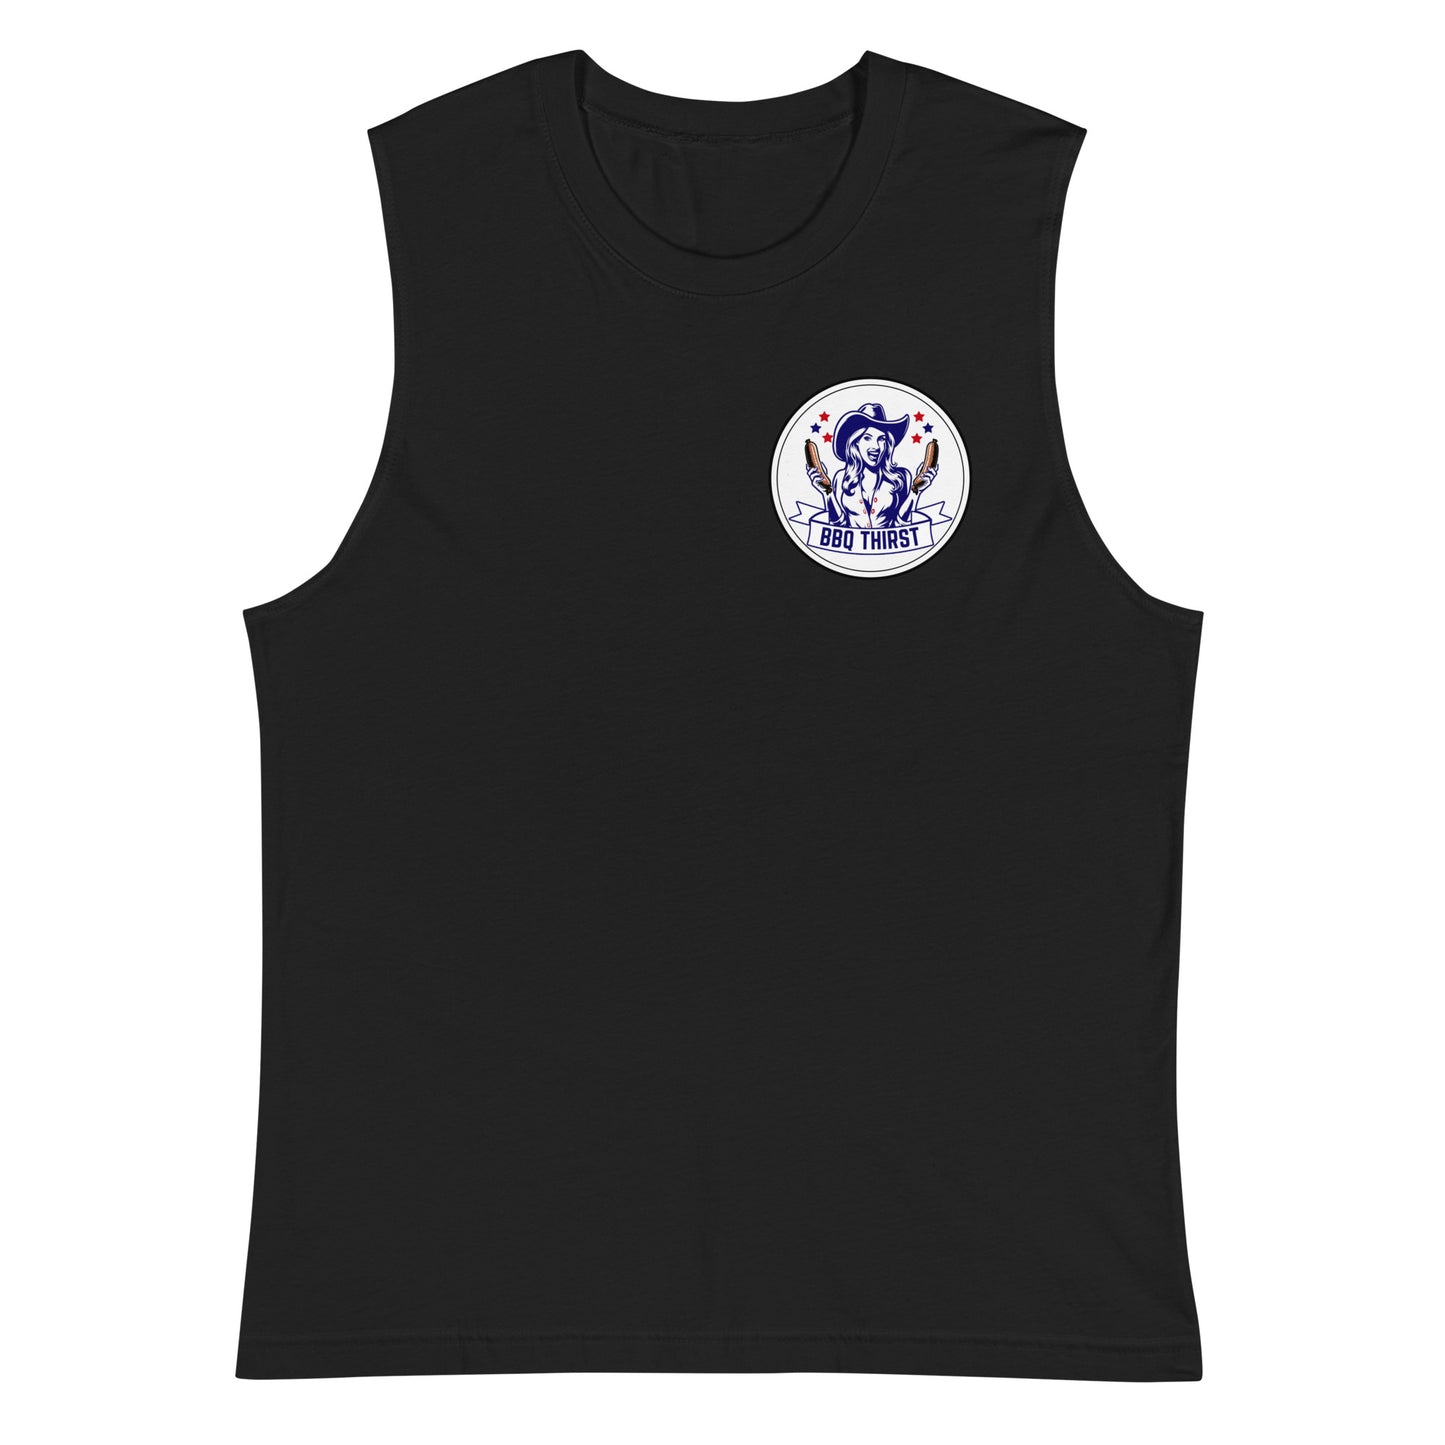 BBQ Thirst Classic Muscle Tee